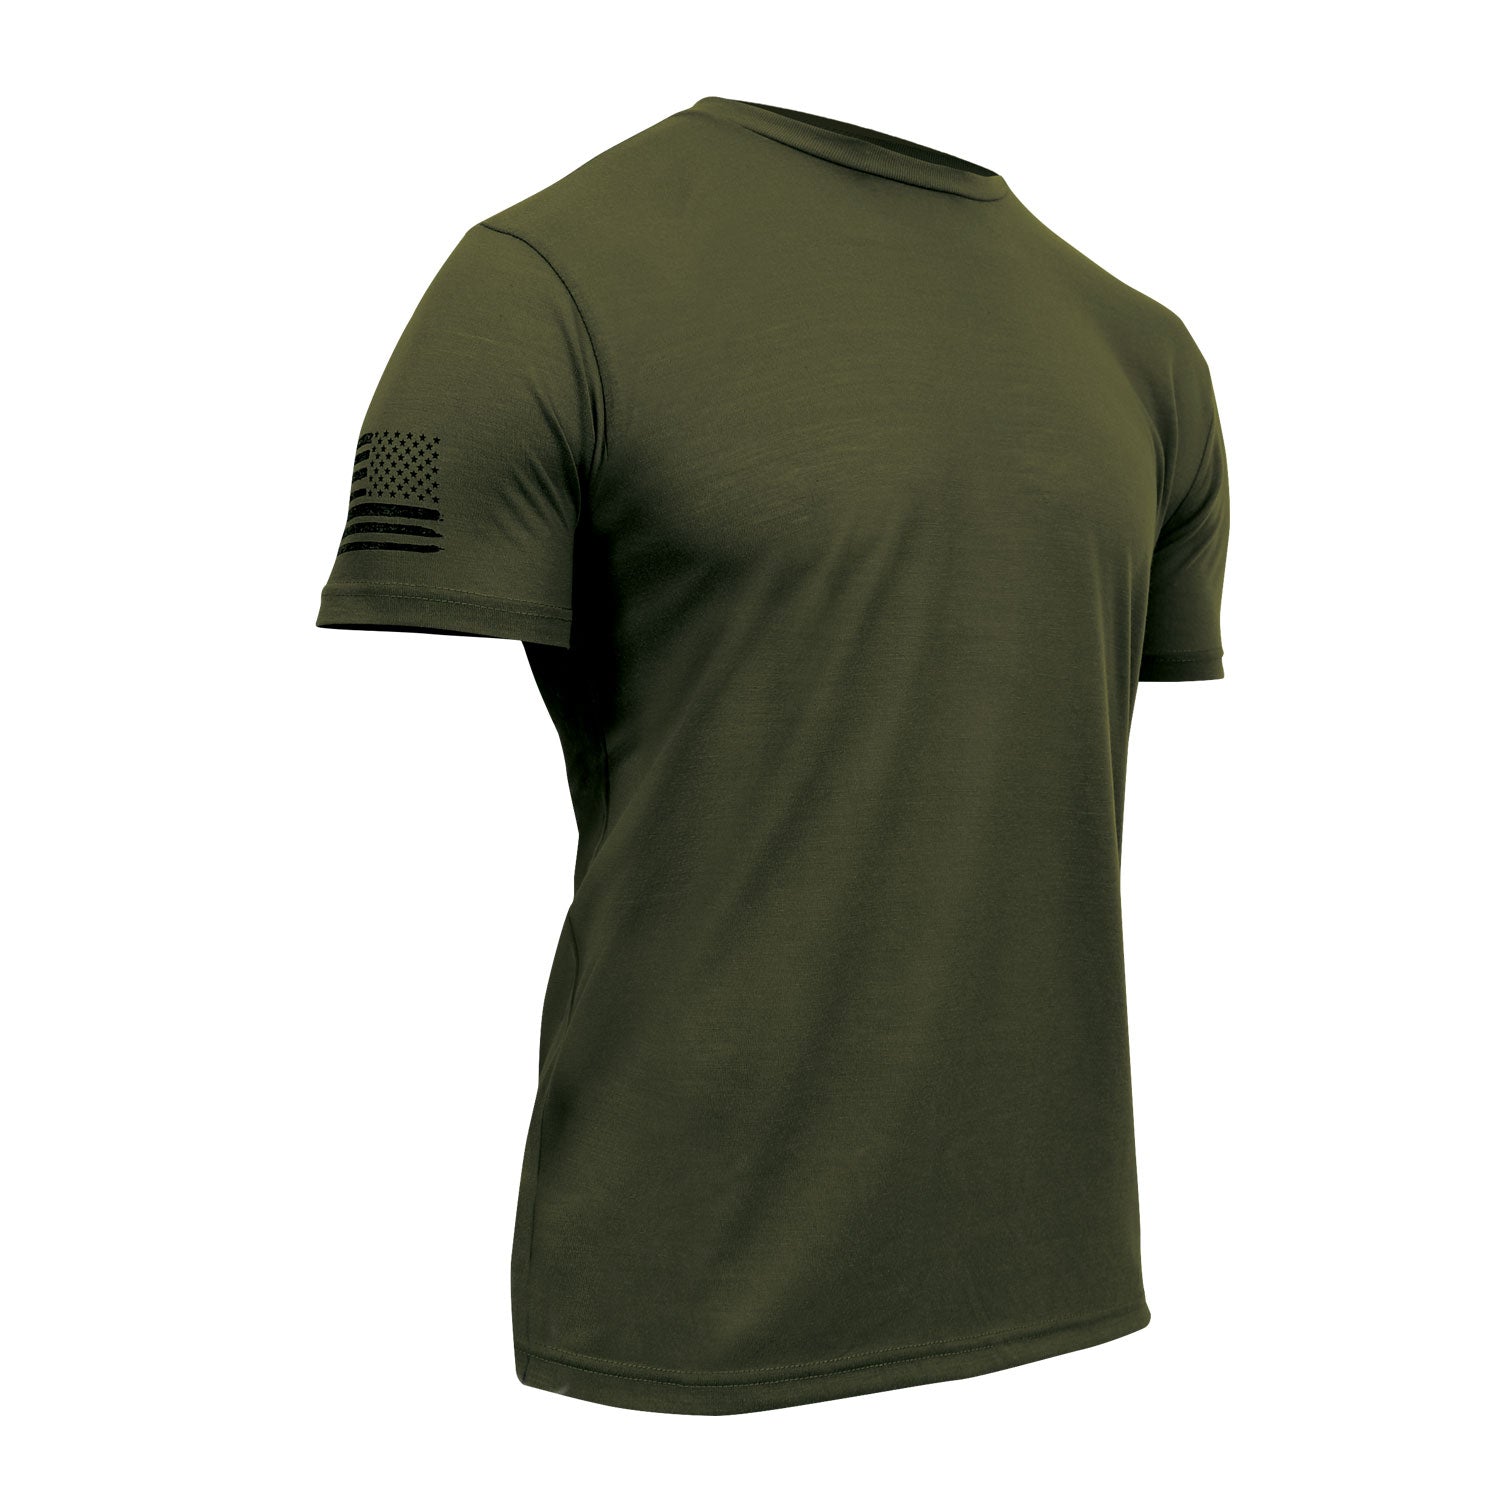 [AR 670-1] Poly Moisture Wicking Athletic Fit T-Shirts Olive Drab